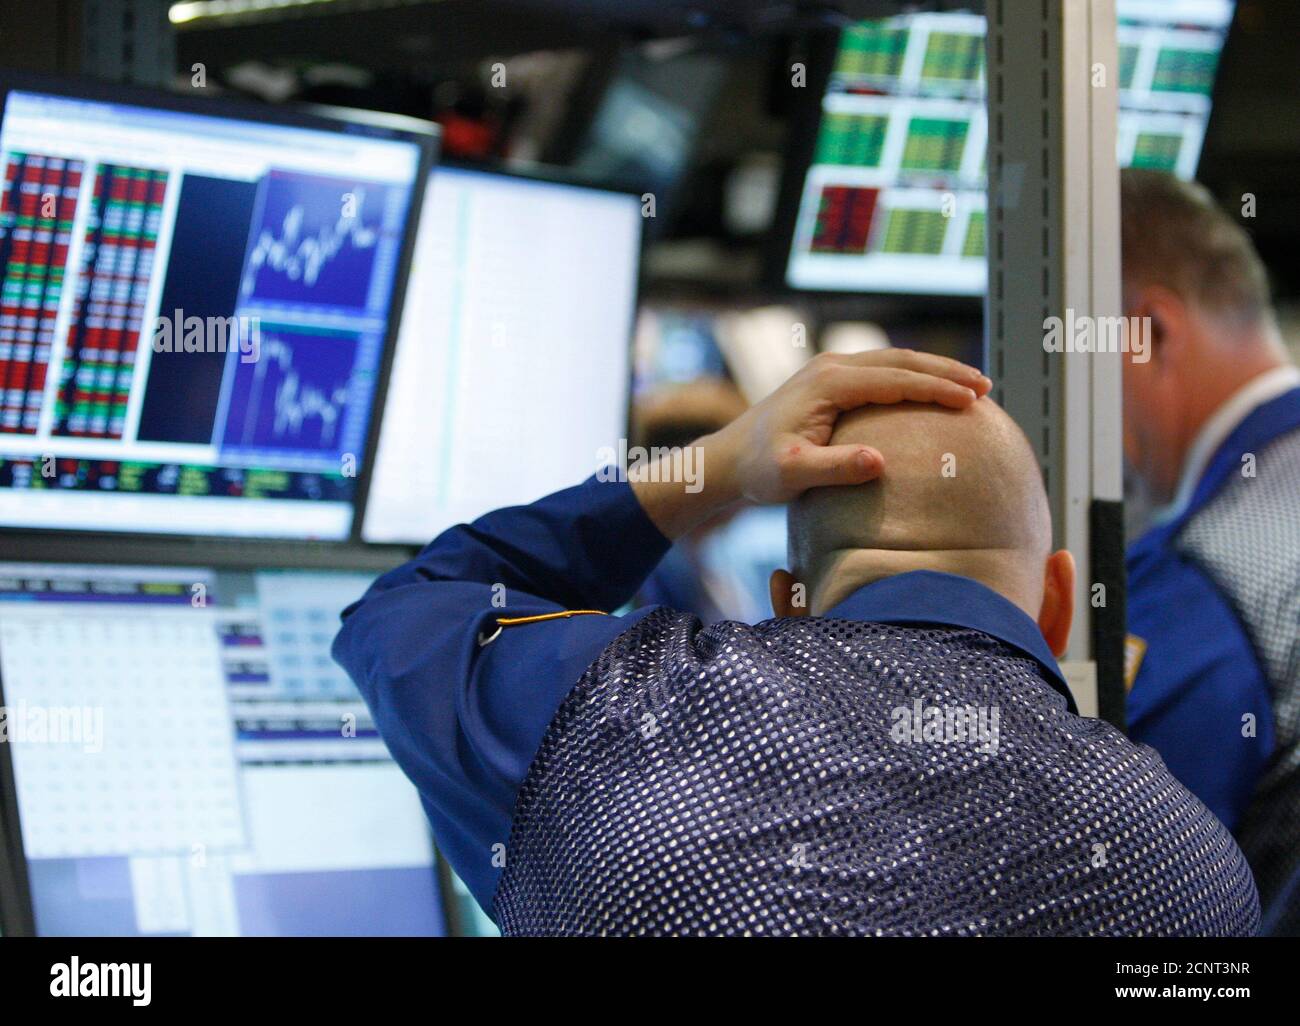 Traders work on the floor of the New York Stock Exchange, April 27, 2009. The S&P 500 and Nasdaq briefly turned lower on Monday, and the Dow Jones industrial average pared gains, after the World Health Organization (WHO) commented on the swine flu outbreak.   REUTERS/Brendan McDermid (UNITED STATES) Stock Photo